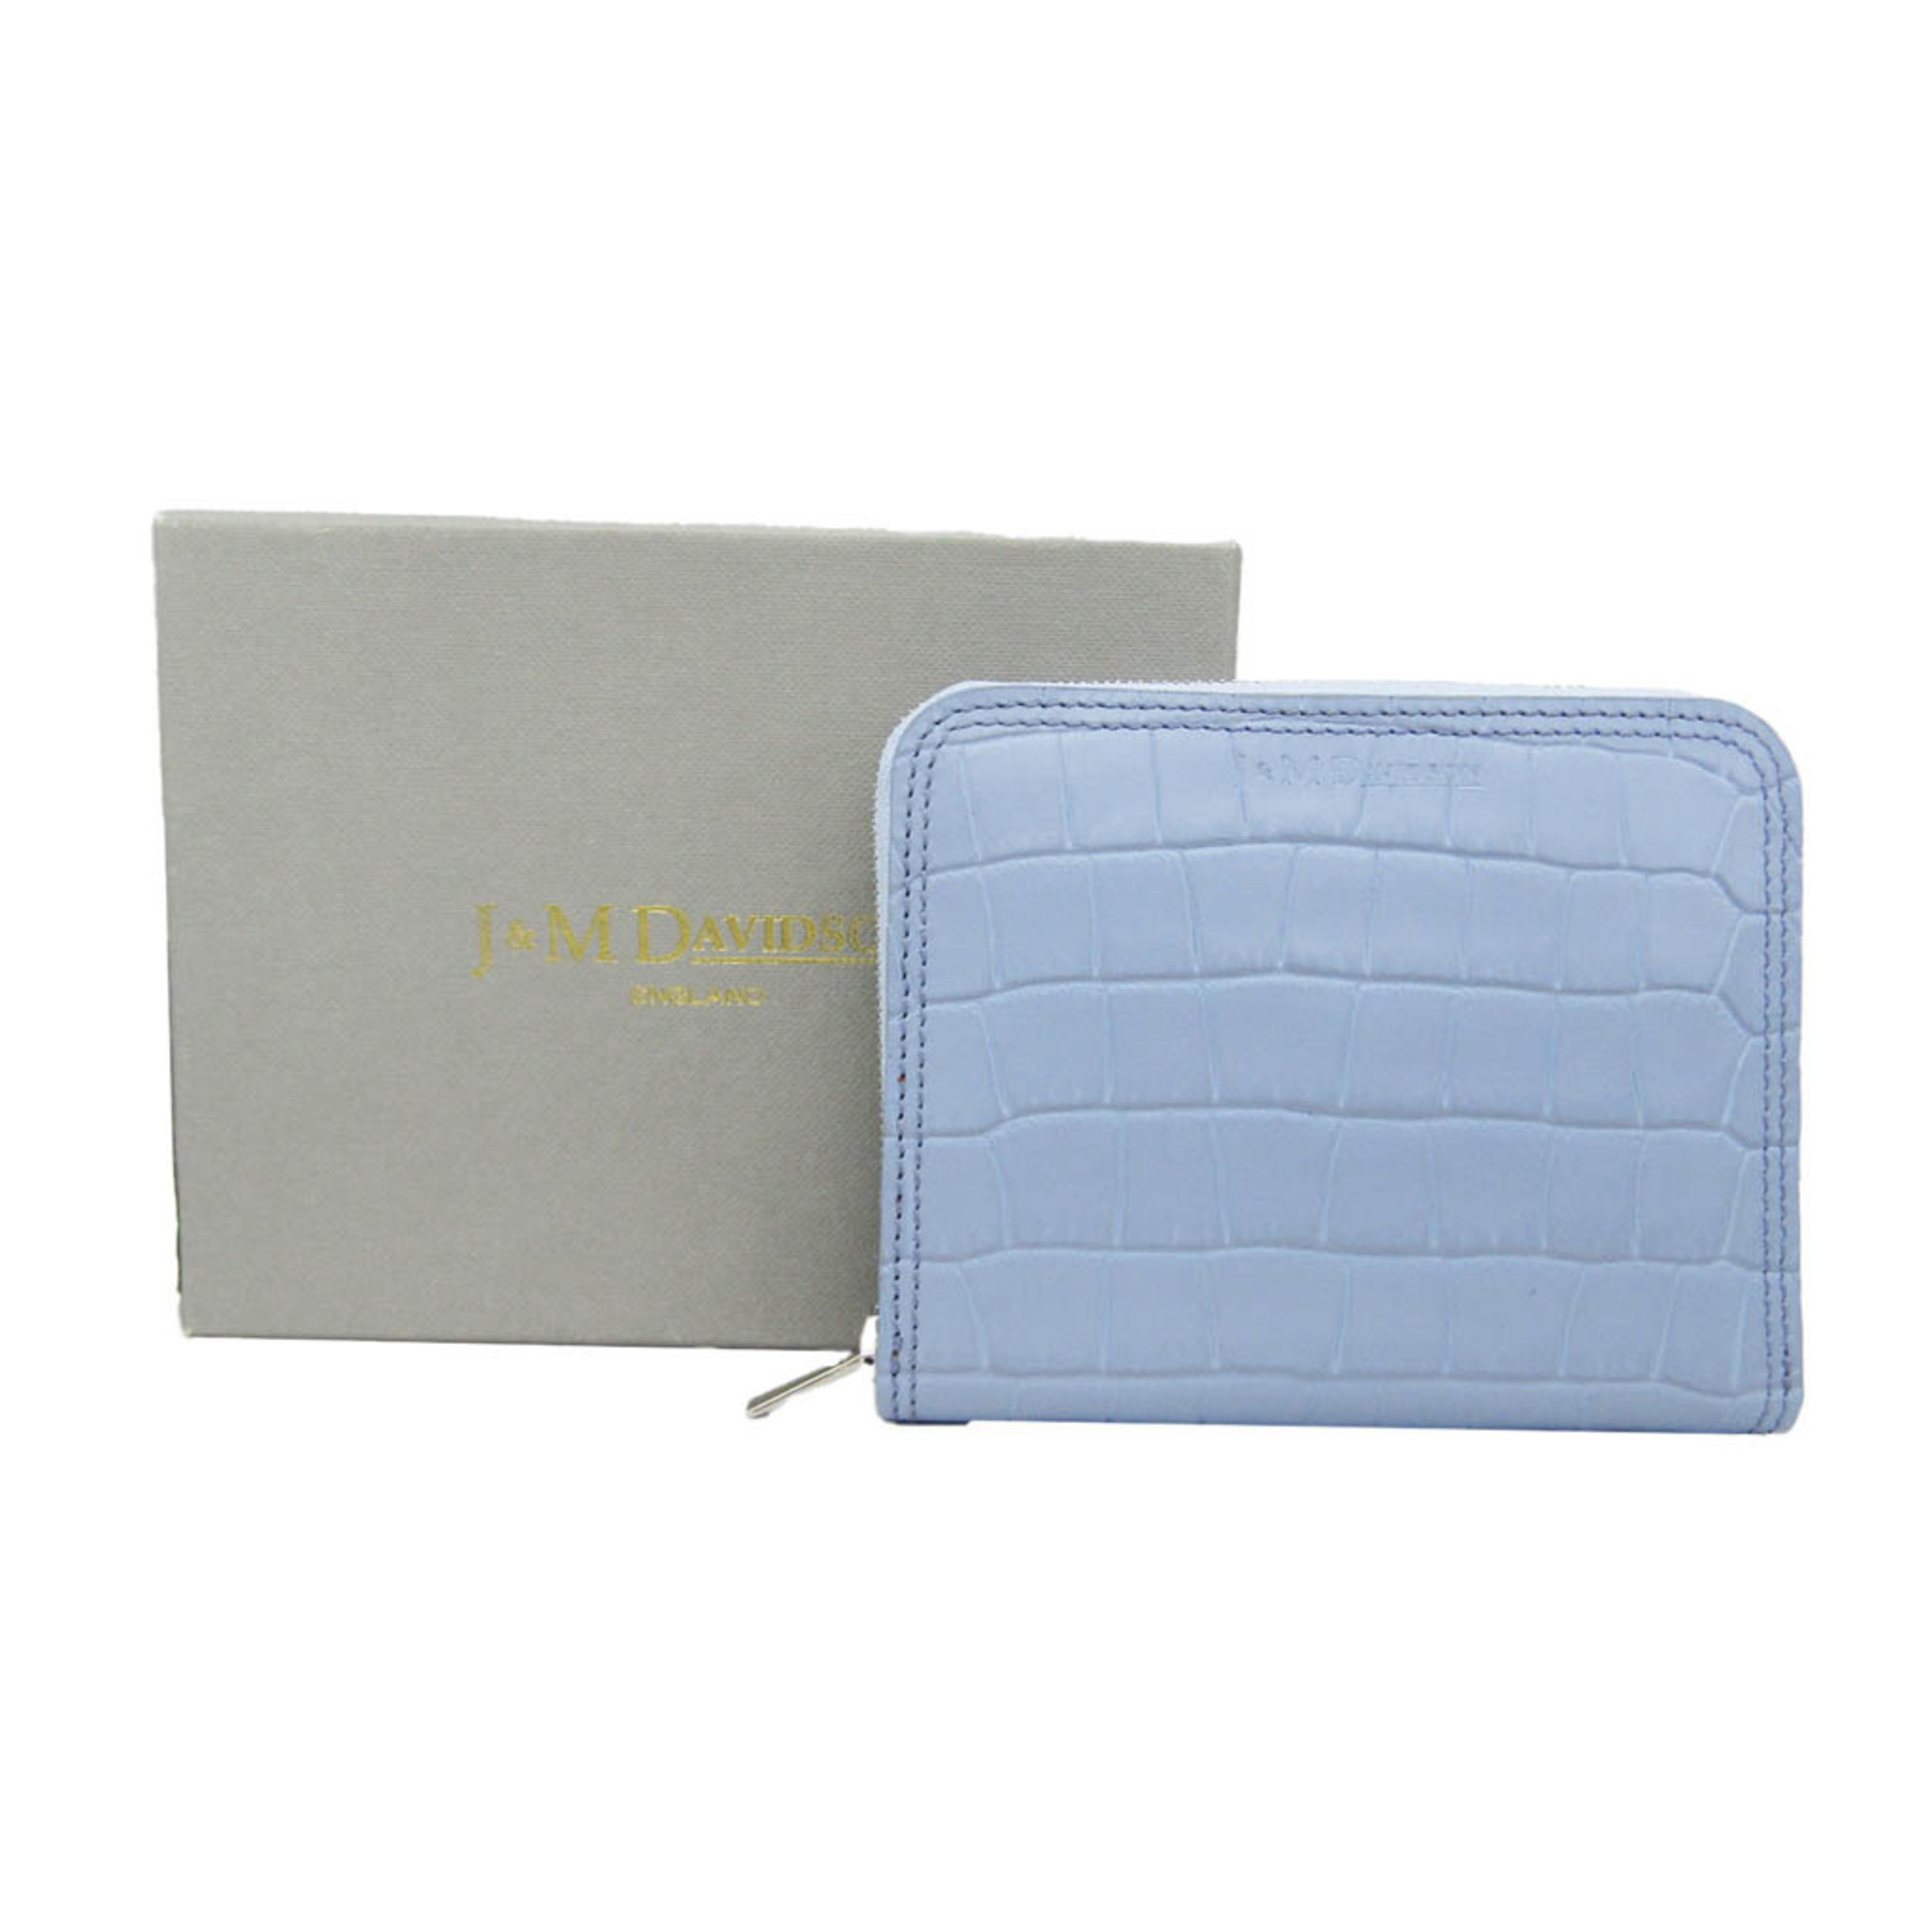 J&M Davidson SMALL ZIP AROUND PURSE 10264N Men,Women  Embossed Leather Coin Purse/coin Case Light Blue